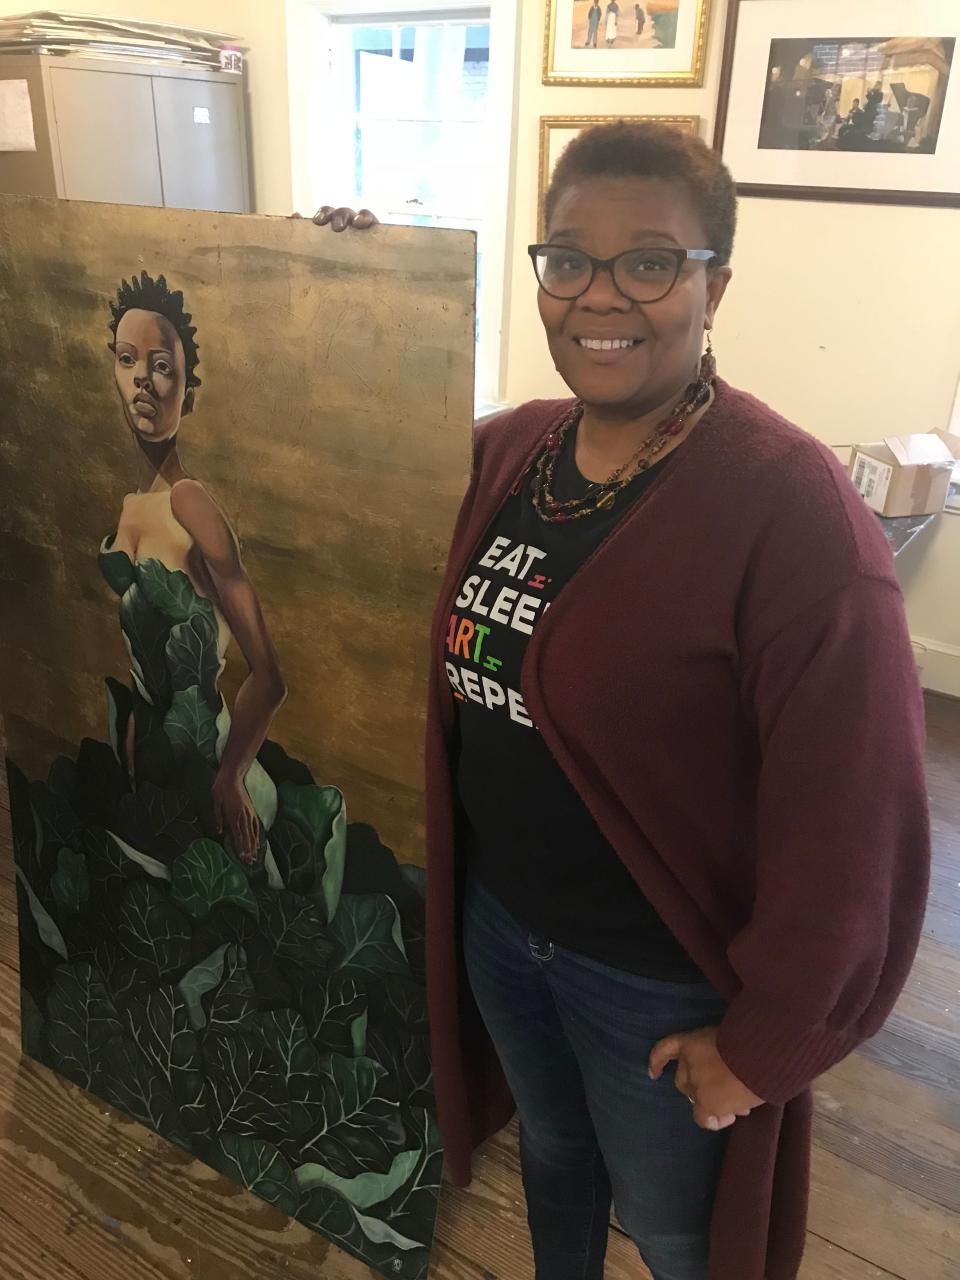 Natalie Daise, who starred in the 90s Nickelodeon show Gullah Gullah Island, now paints and gives tours in Georgetown, S.C.